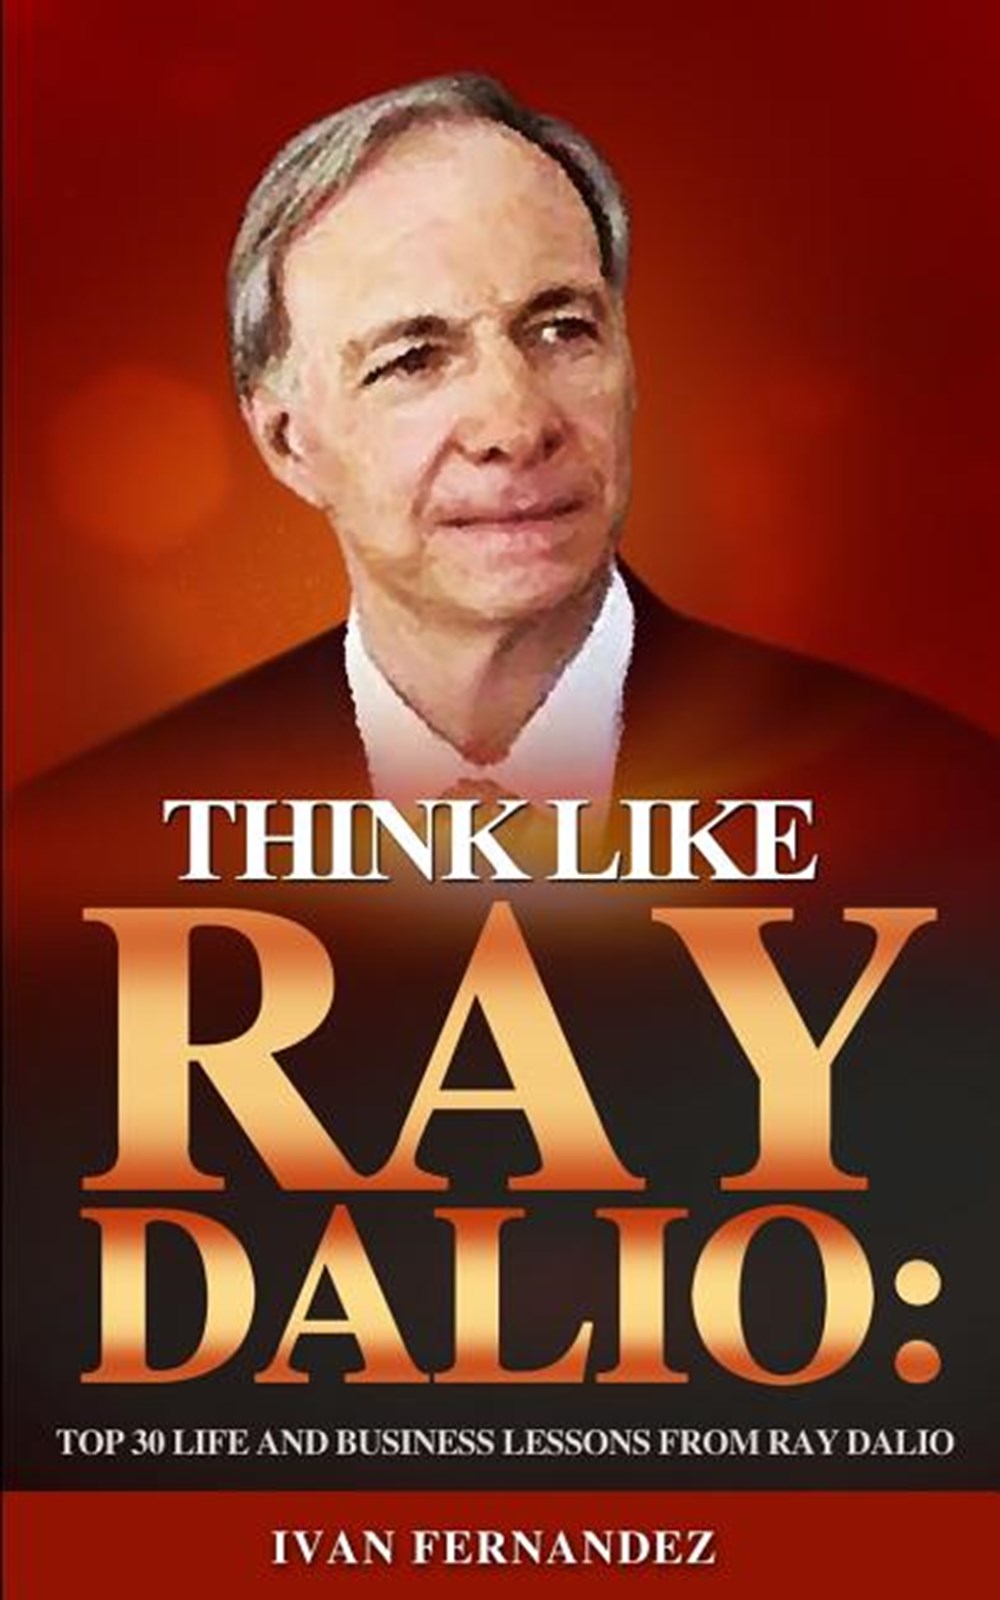 Think Like Ray Dalio Top 30 Life and Business Lessons from Ray Dalio